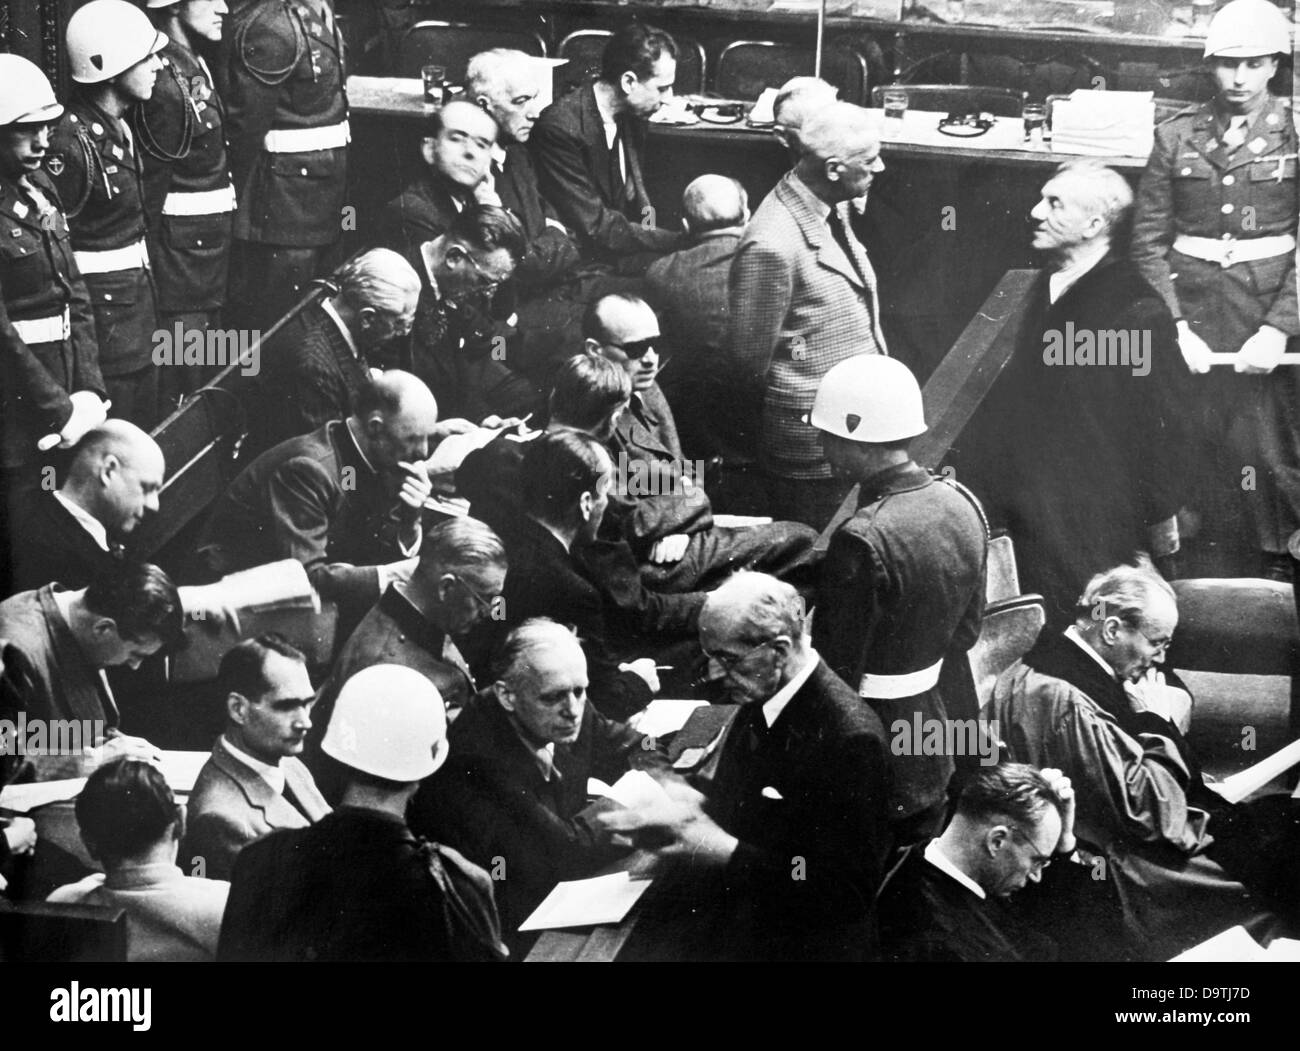 Military police are pictured around the bench of the first defendants at the Nuremberg Trials in the context of the International Military Tribunal against the major war criminals of World War II  in Nuremberg, Germany, in 1946. Photo: Yevgeny Khaldei Stock Photo